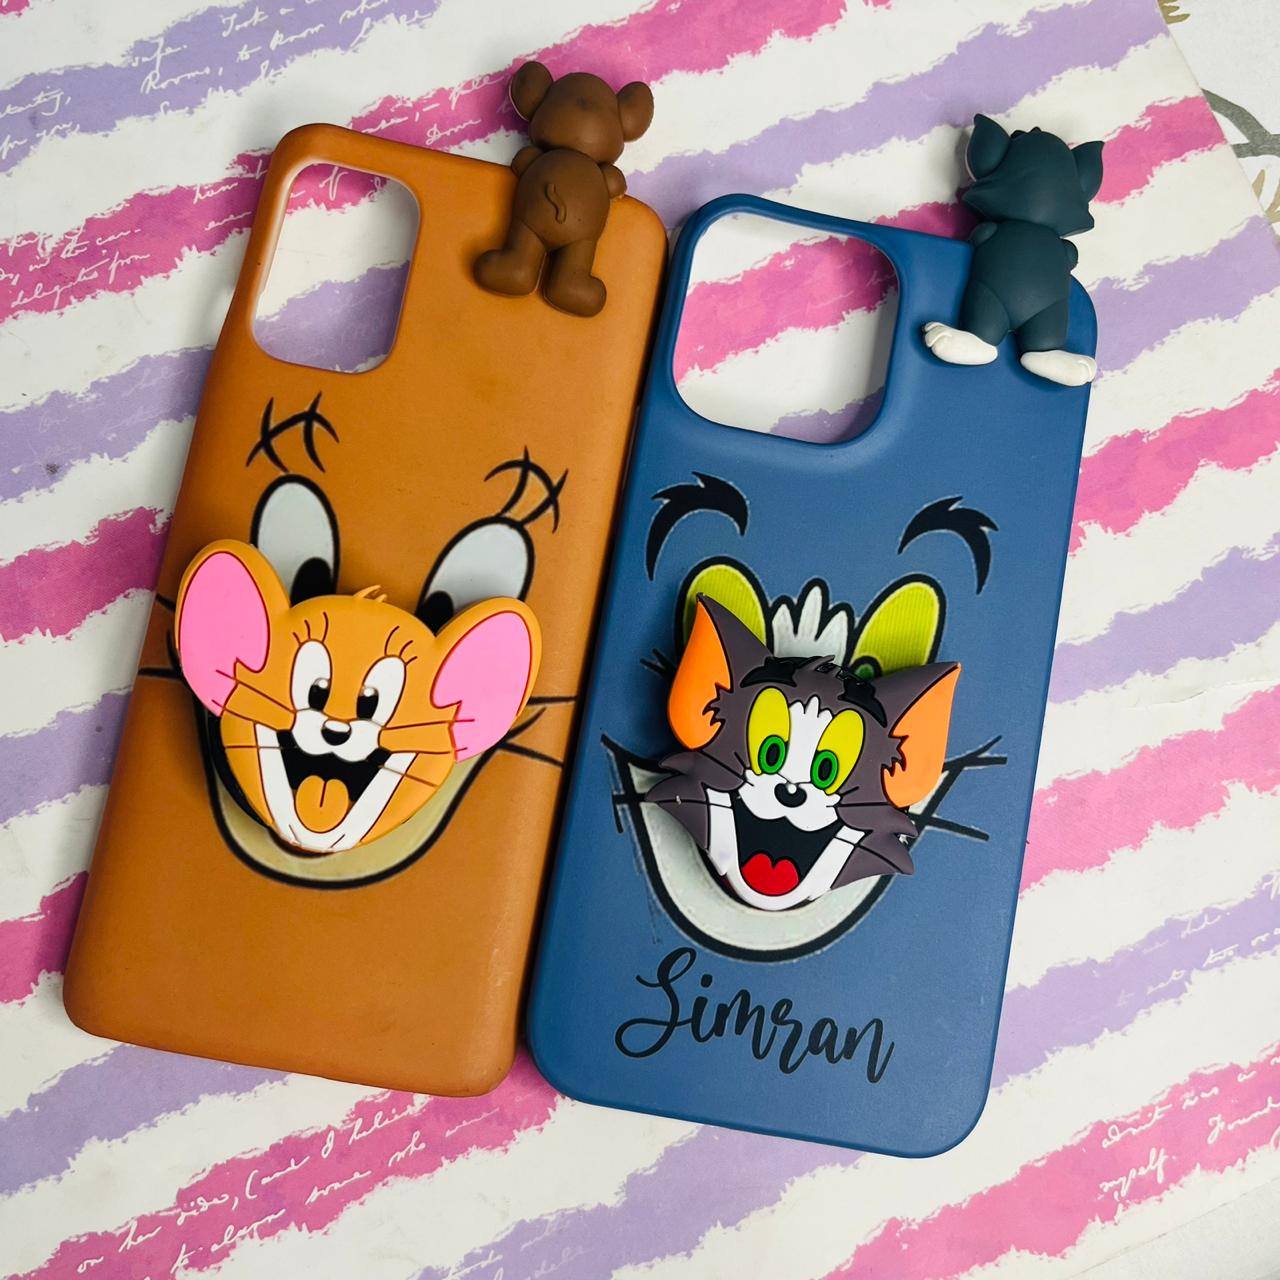 Tom or Jerry Toy case